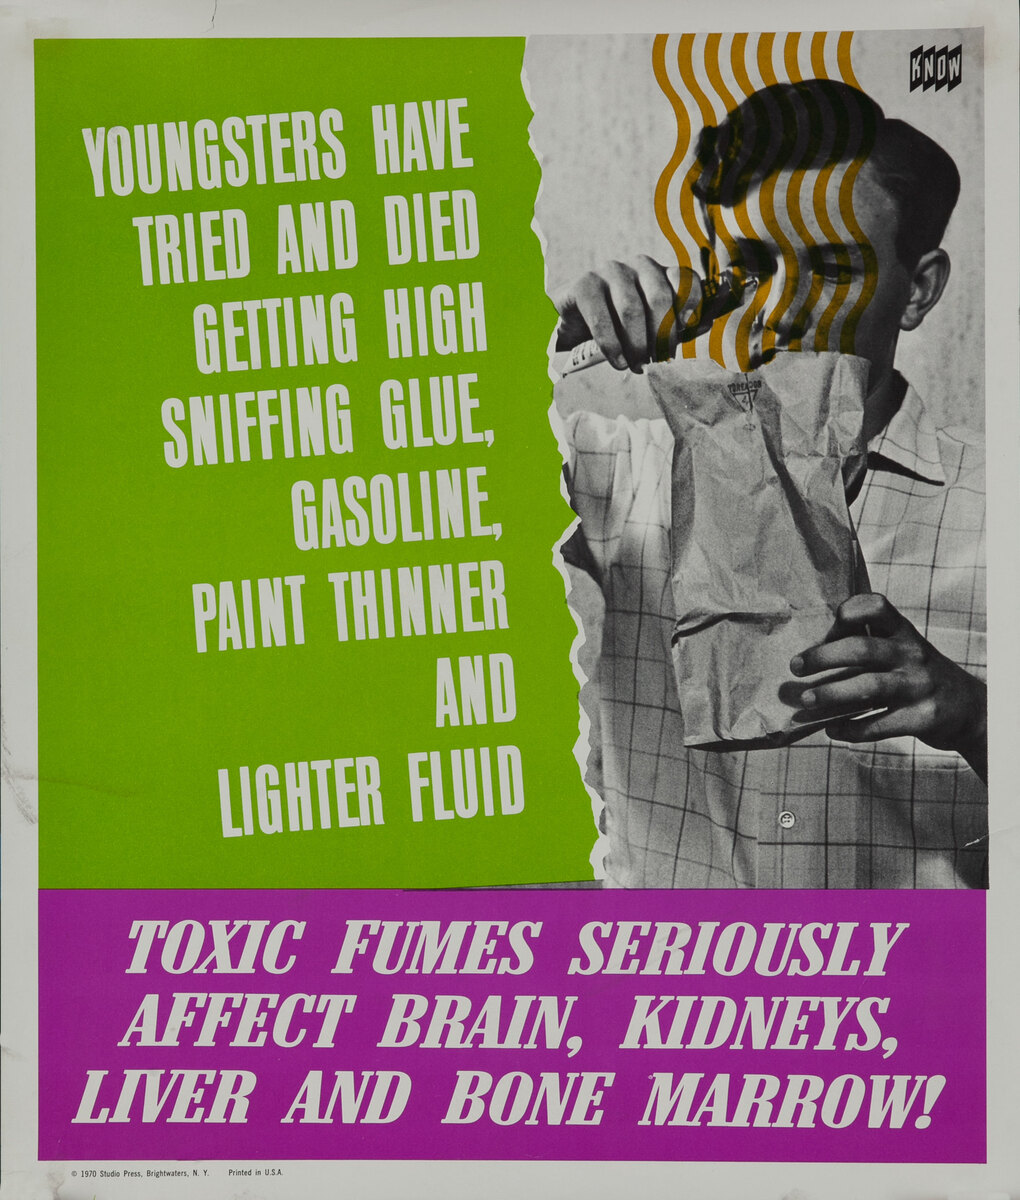 KNOW Youngsters have tried and died getting high sniffing glue, gasoline, paint thinner and lighter fluid